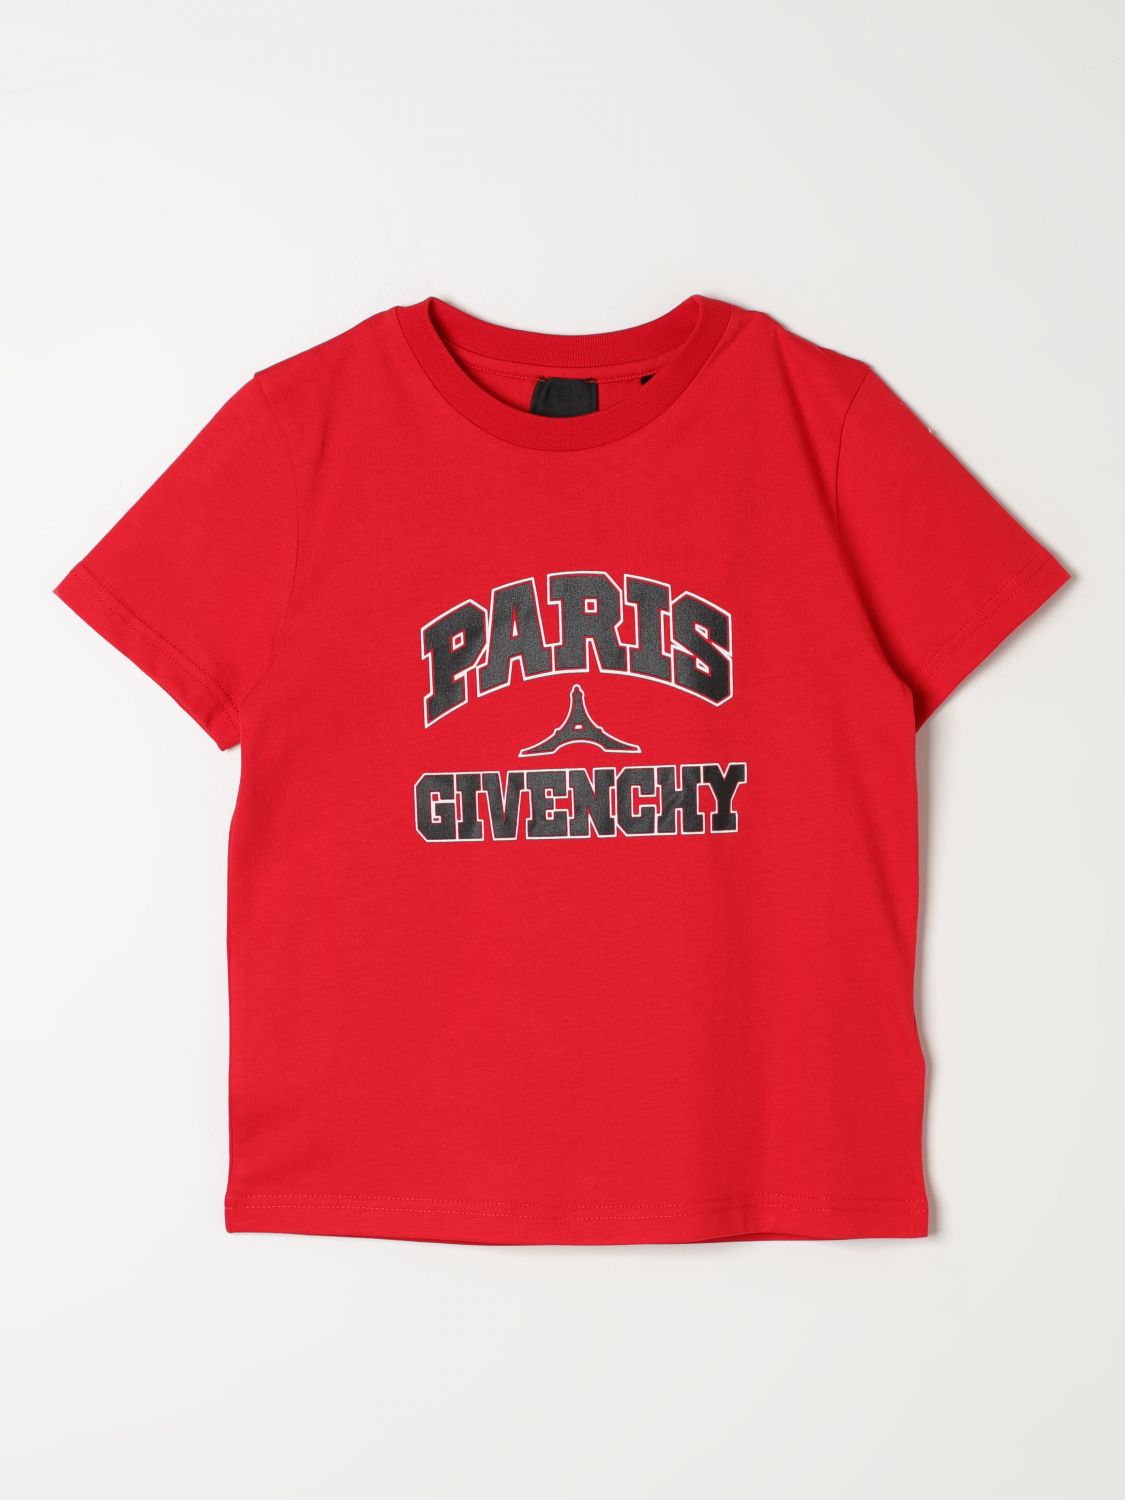 Givenchy T-shirt  Kids Color Red